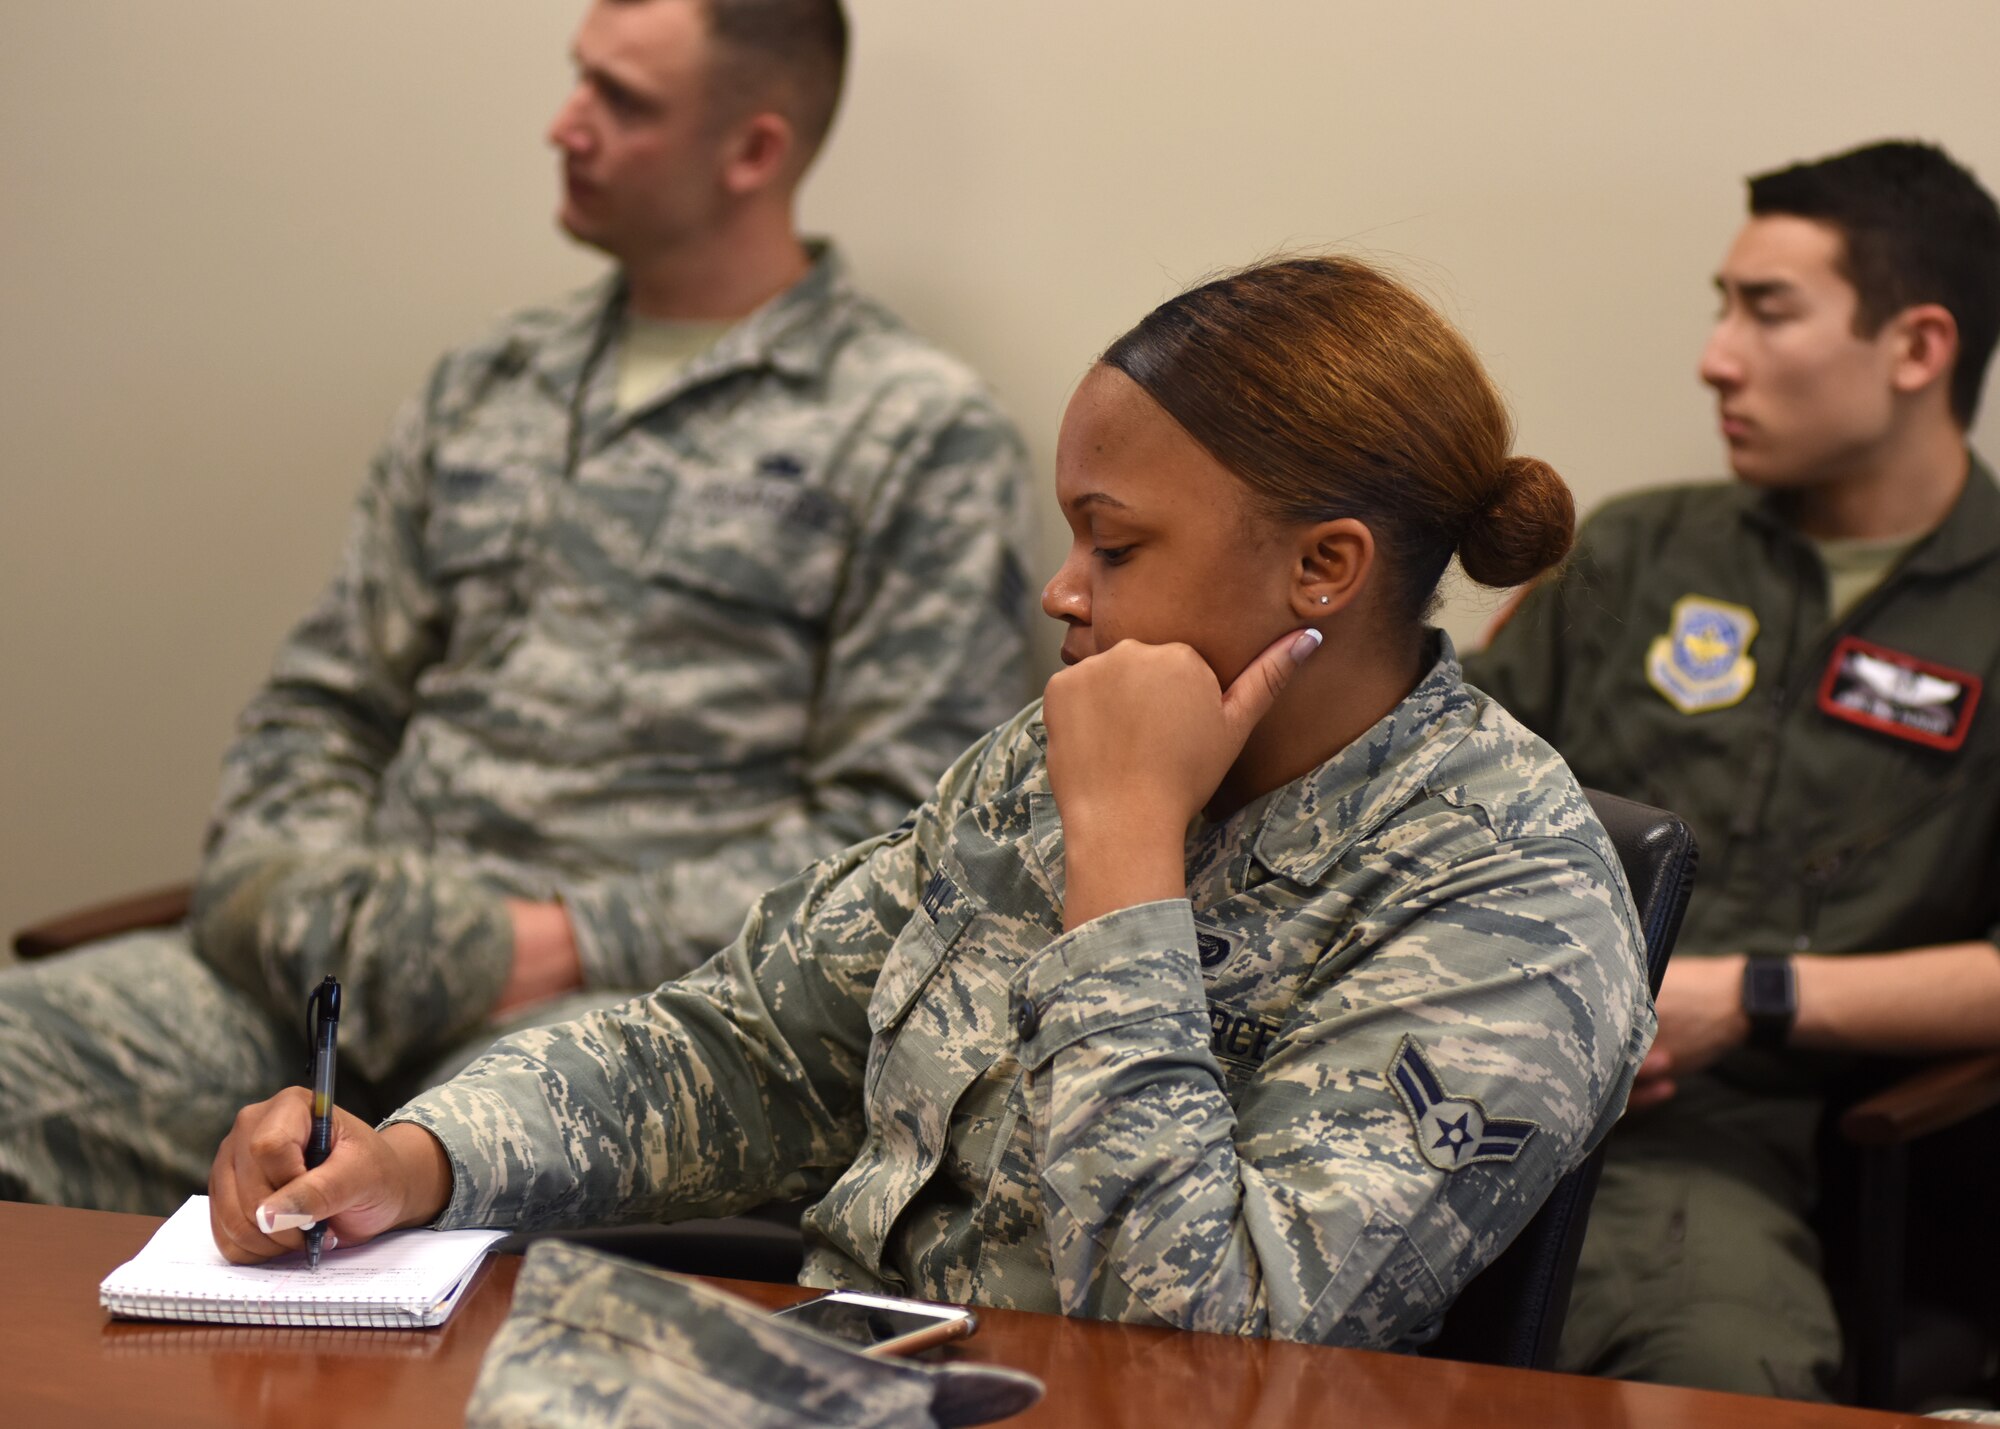 A female in uniform sits at a table taking notes.